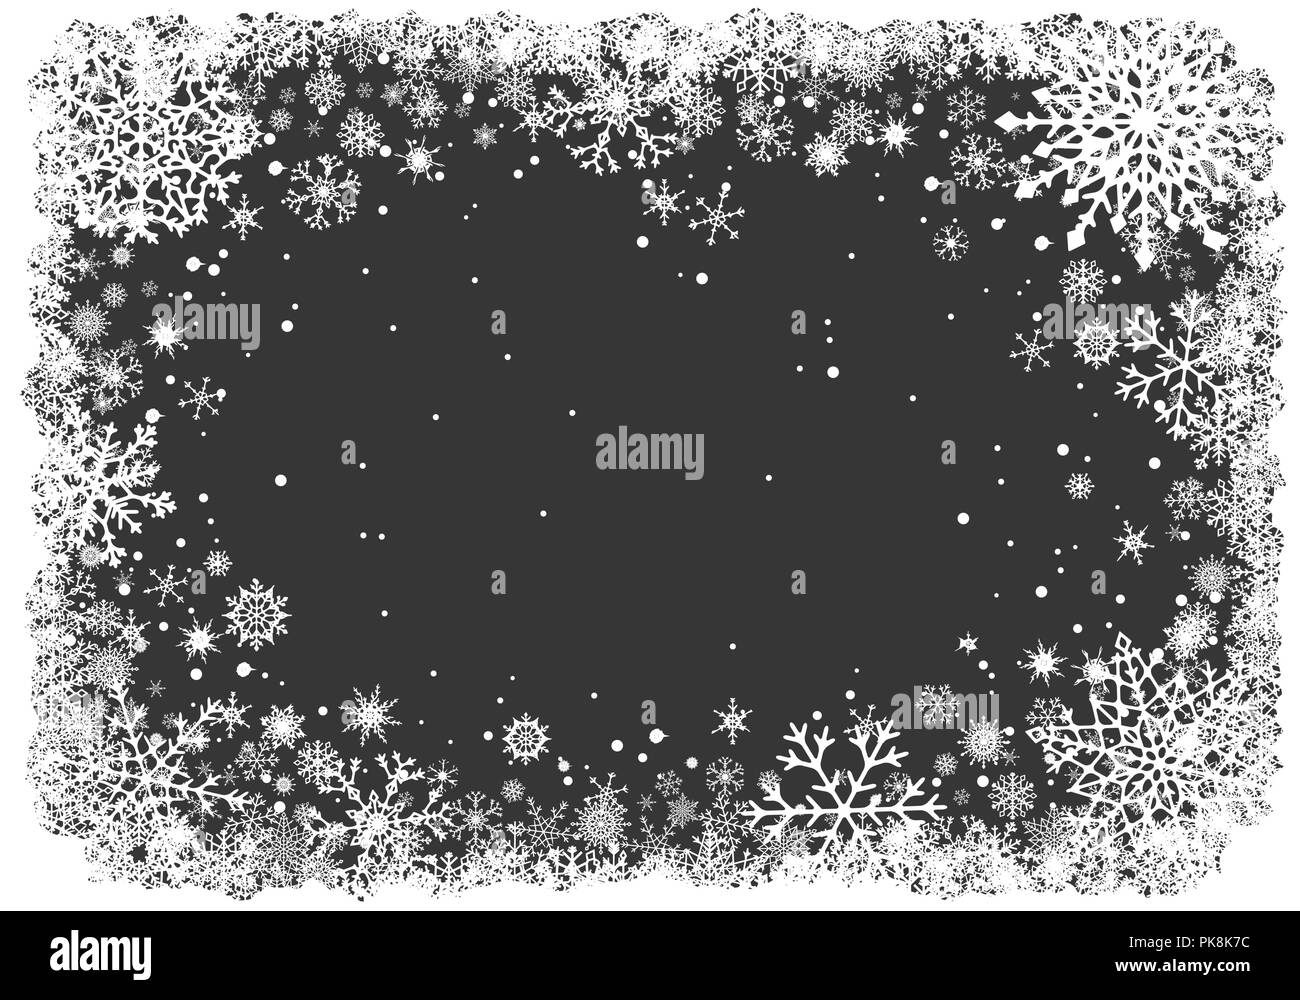 Christmas background with frame of snowflakes Stock Vector